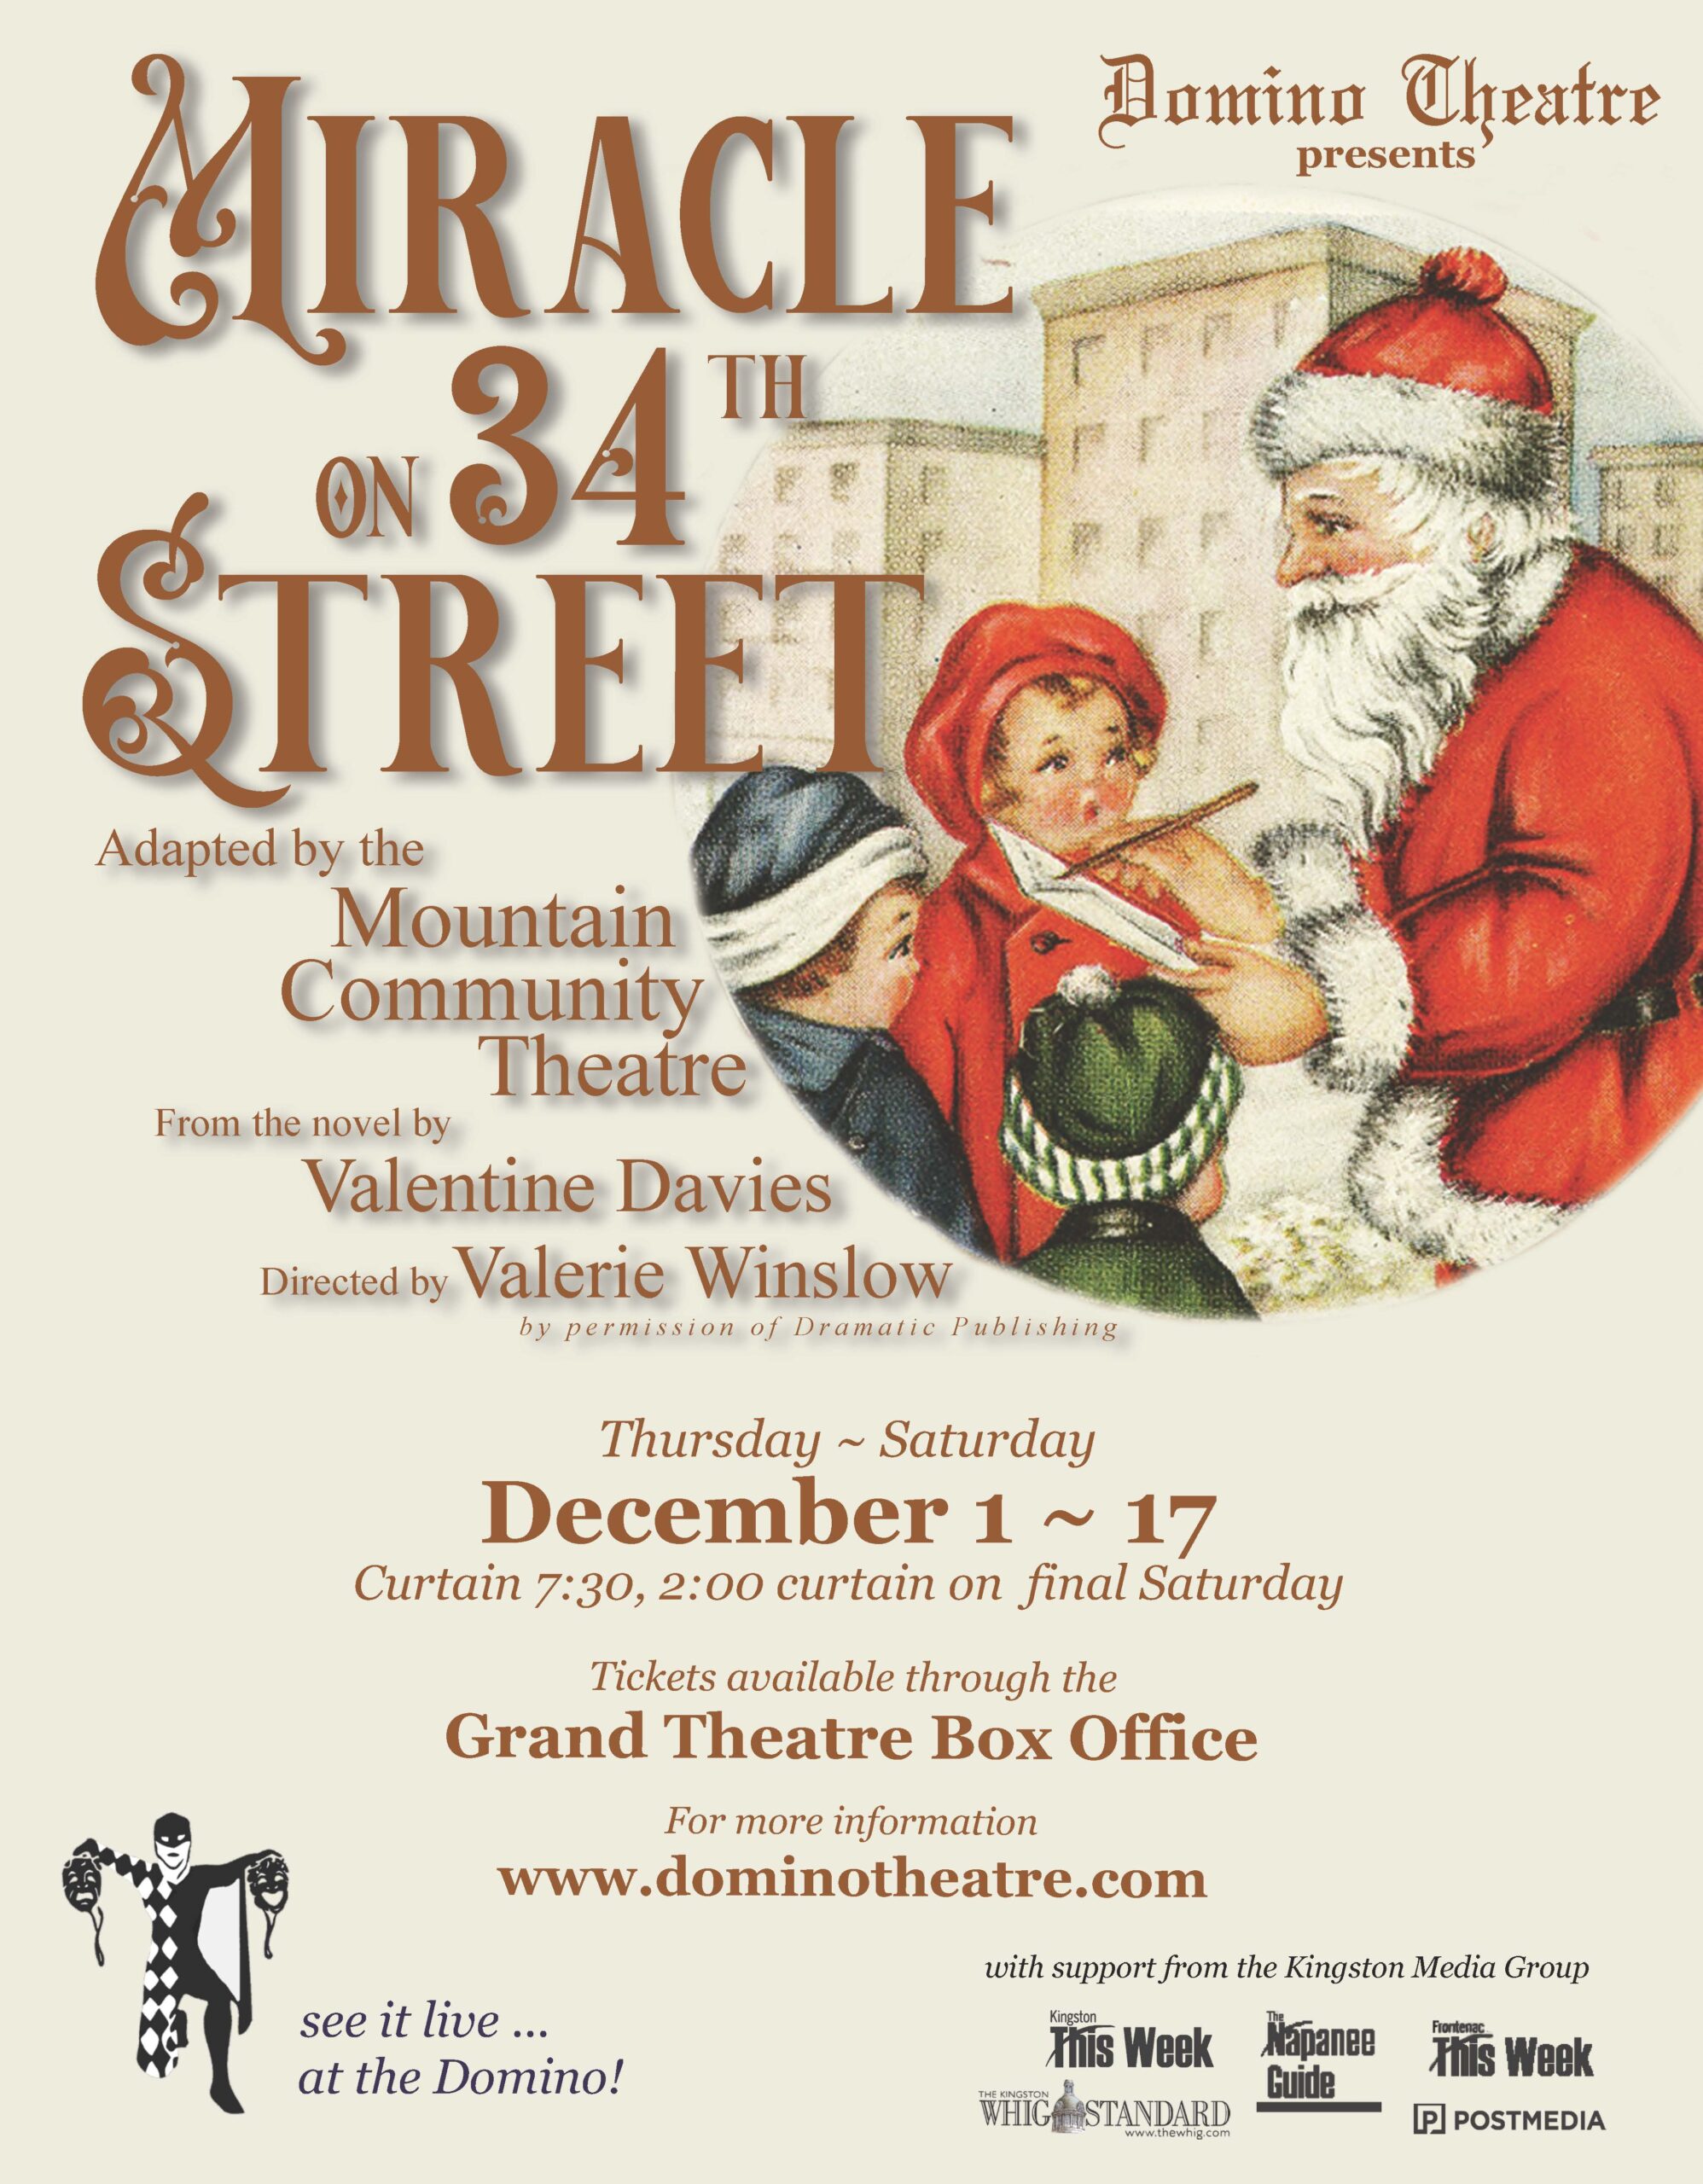 A beige background. In the top right corner Santa is writing on a piece of paper while talking with three kids. Text reads "Miracle on 34th Street," "Adapted by the Mountain Community Theatre," "From the Novel by Valentine Davies," "Directed by Valerie Winslow," "By permission of Dramatic publishing," "Thursday ~ Saturday," "December 1 ~ 17," "Curtain 7:30, 2:00 curtain on final Saturday," "Tickets available through the Grand Theatre Box Office," "For more information www.dominotheatre.com," "with support from the Kingston Media Group."